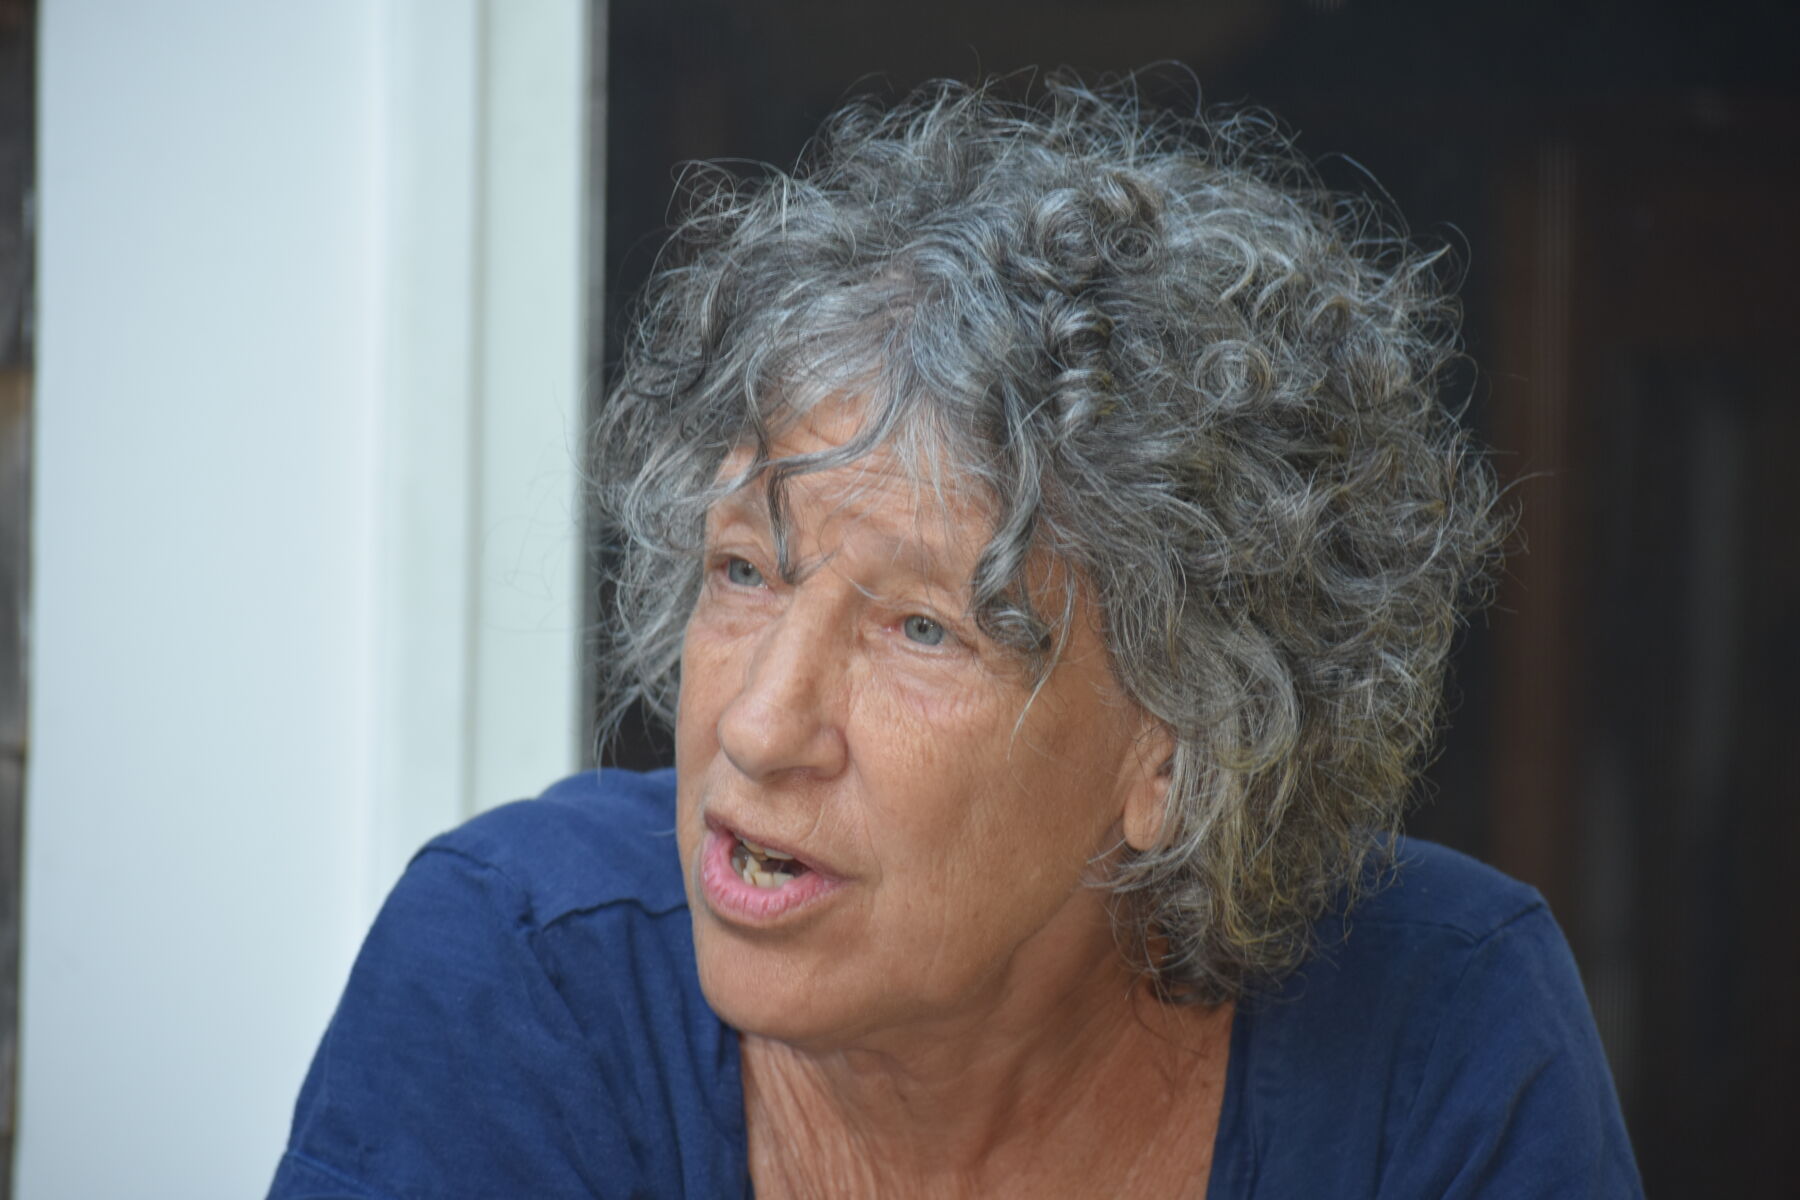 An elderly person with curly gray hair is speaking while seated. They are wearing a dark blue shirt.